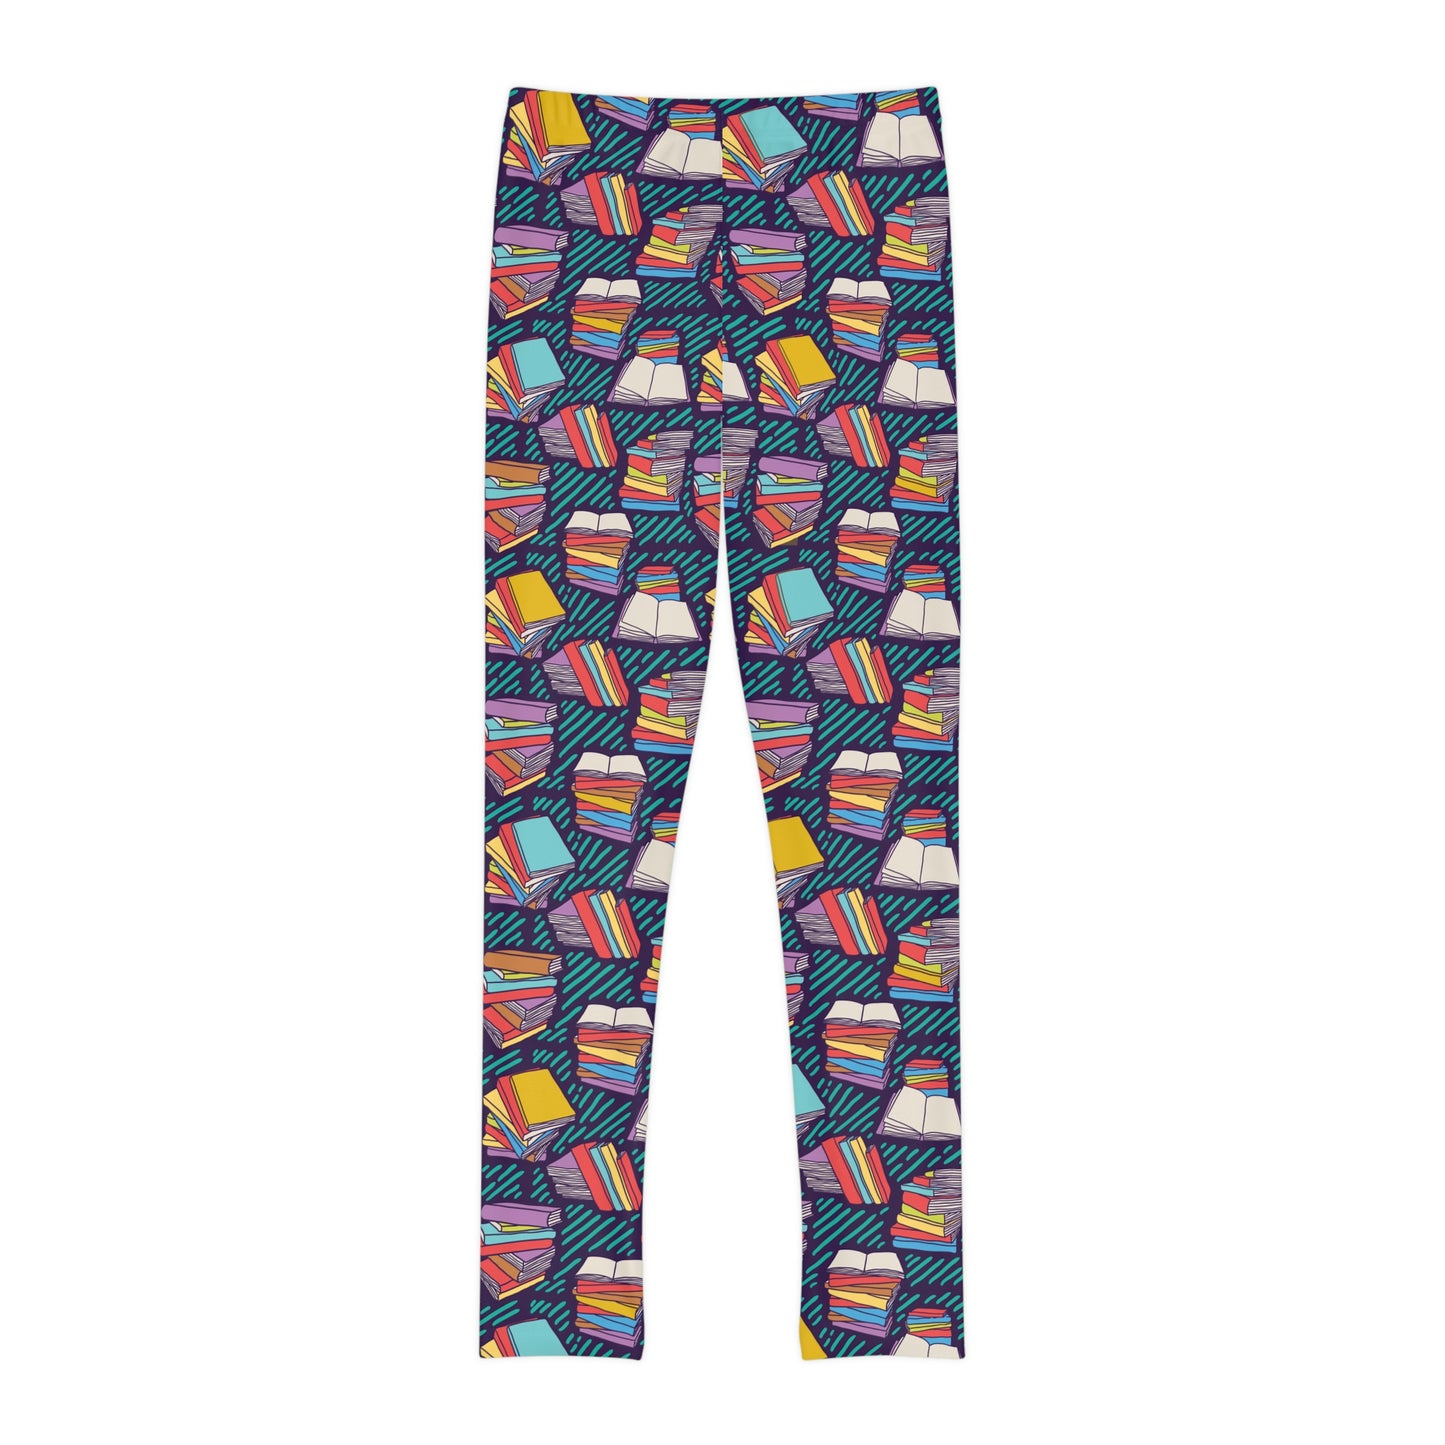 Book Lovers Youth Leggings,  One of a Kind Gift - Unique Workout Activewear tights for  kids Fitness , Daughter, Niece  Christmas Gift